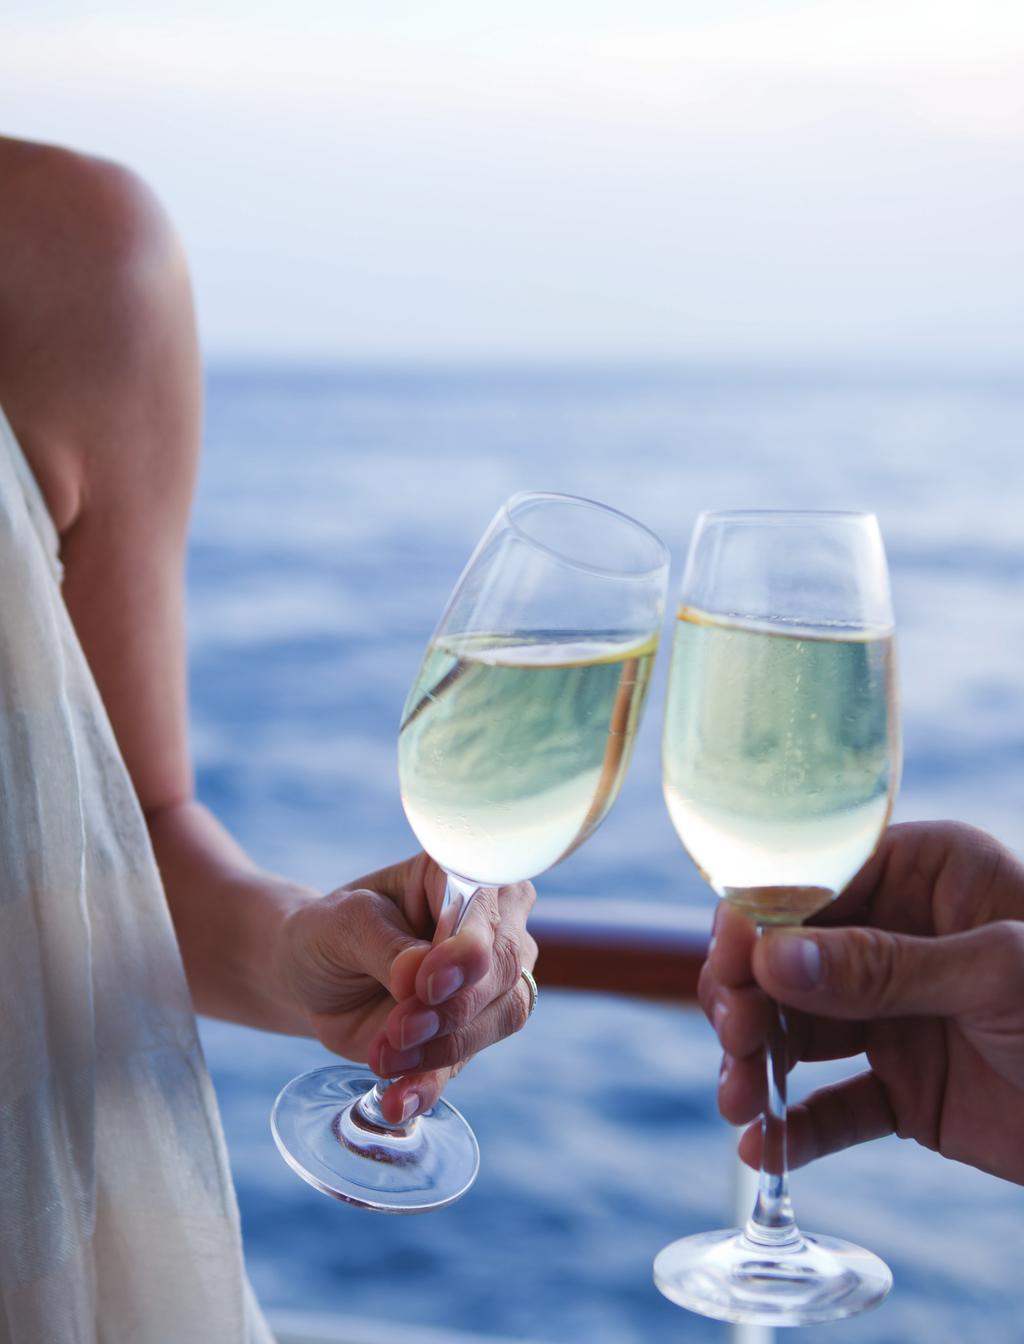 THE BEST VALUE IN LUXURY CRUISING THE ALL-INCLUSIVE REGENT EXPERIENCE We offer the world s most inclusive experience at an 2-FOR-1 ALL-INCLUSIVE FARES extraordinary value.